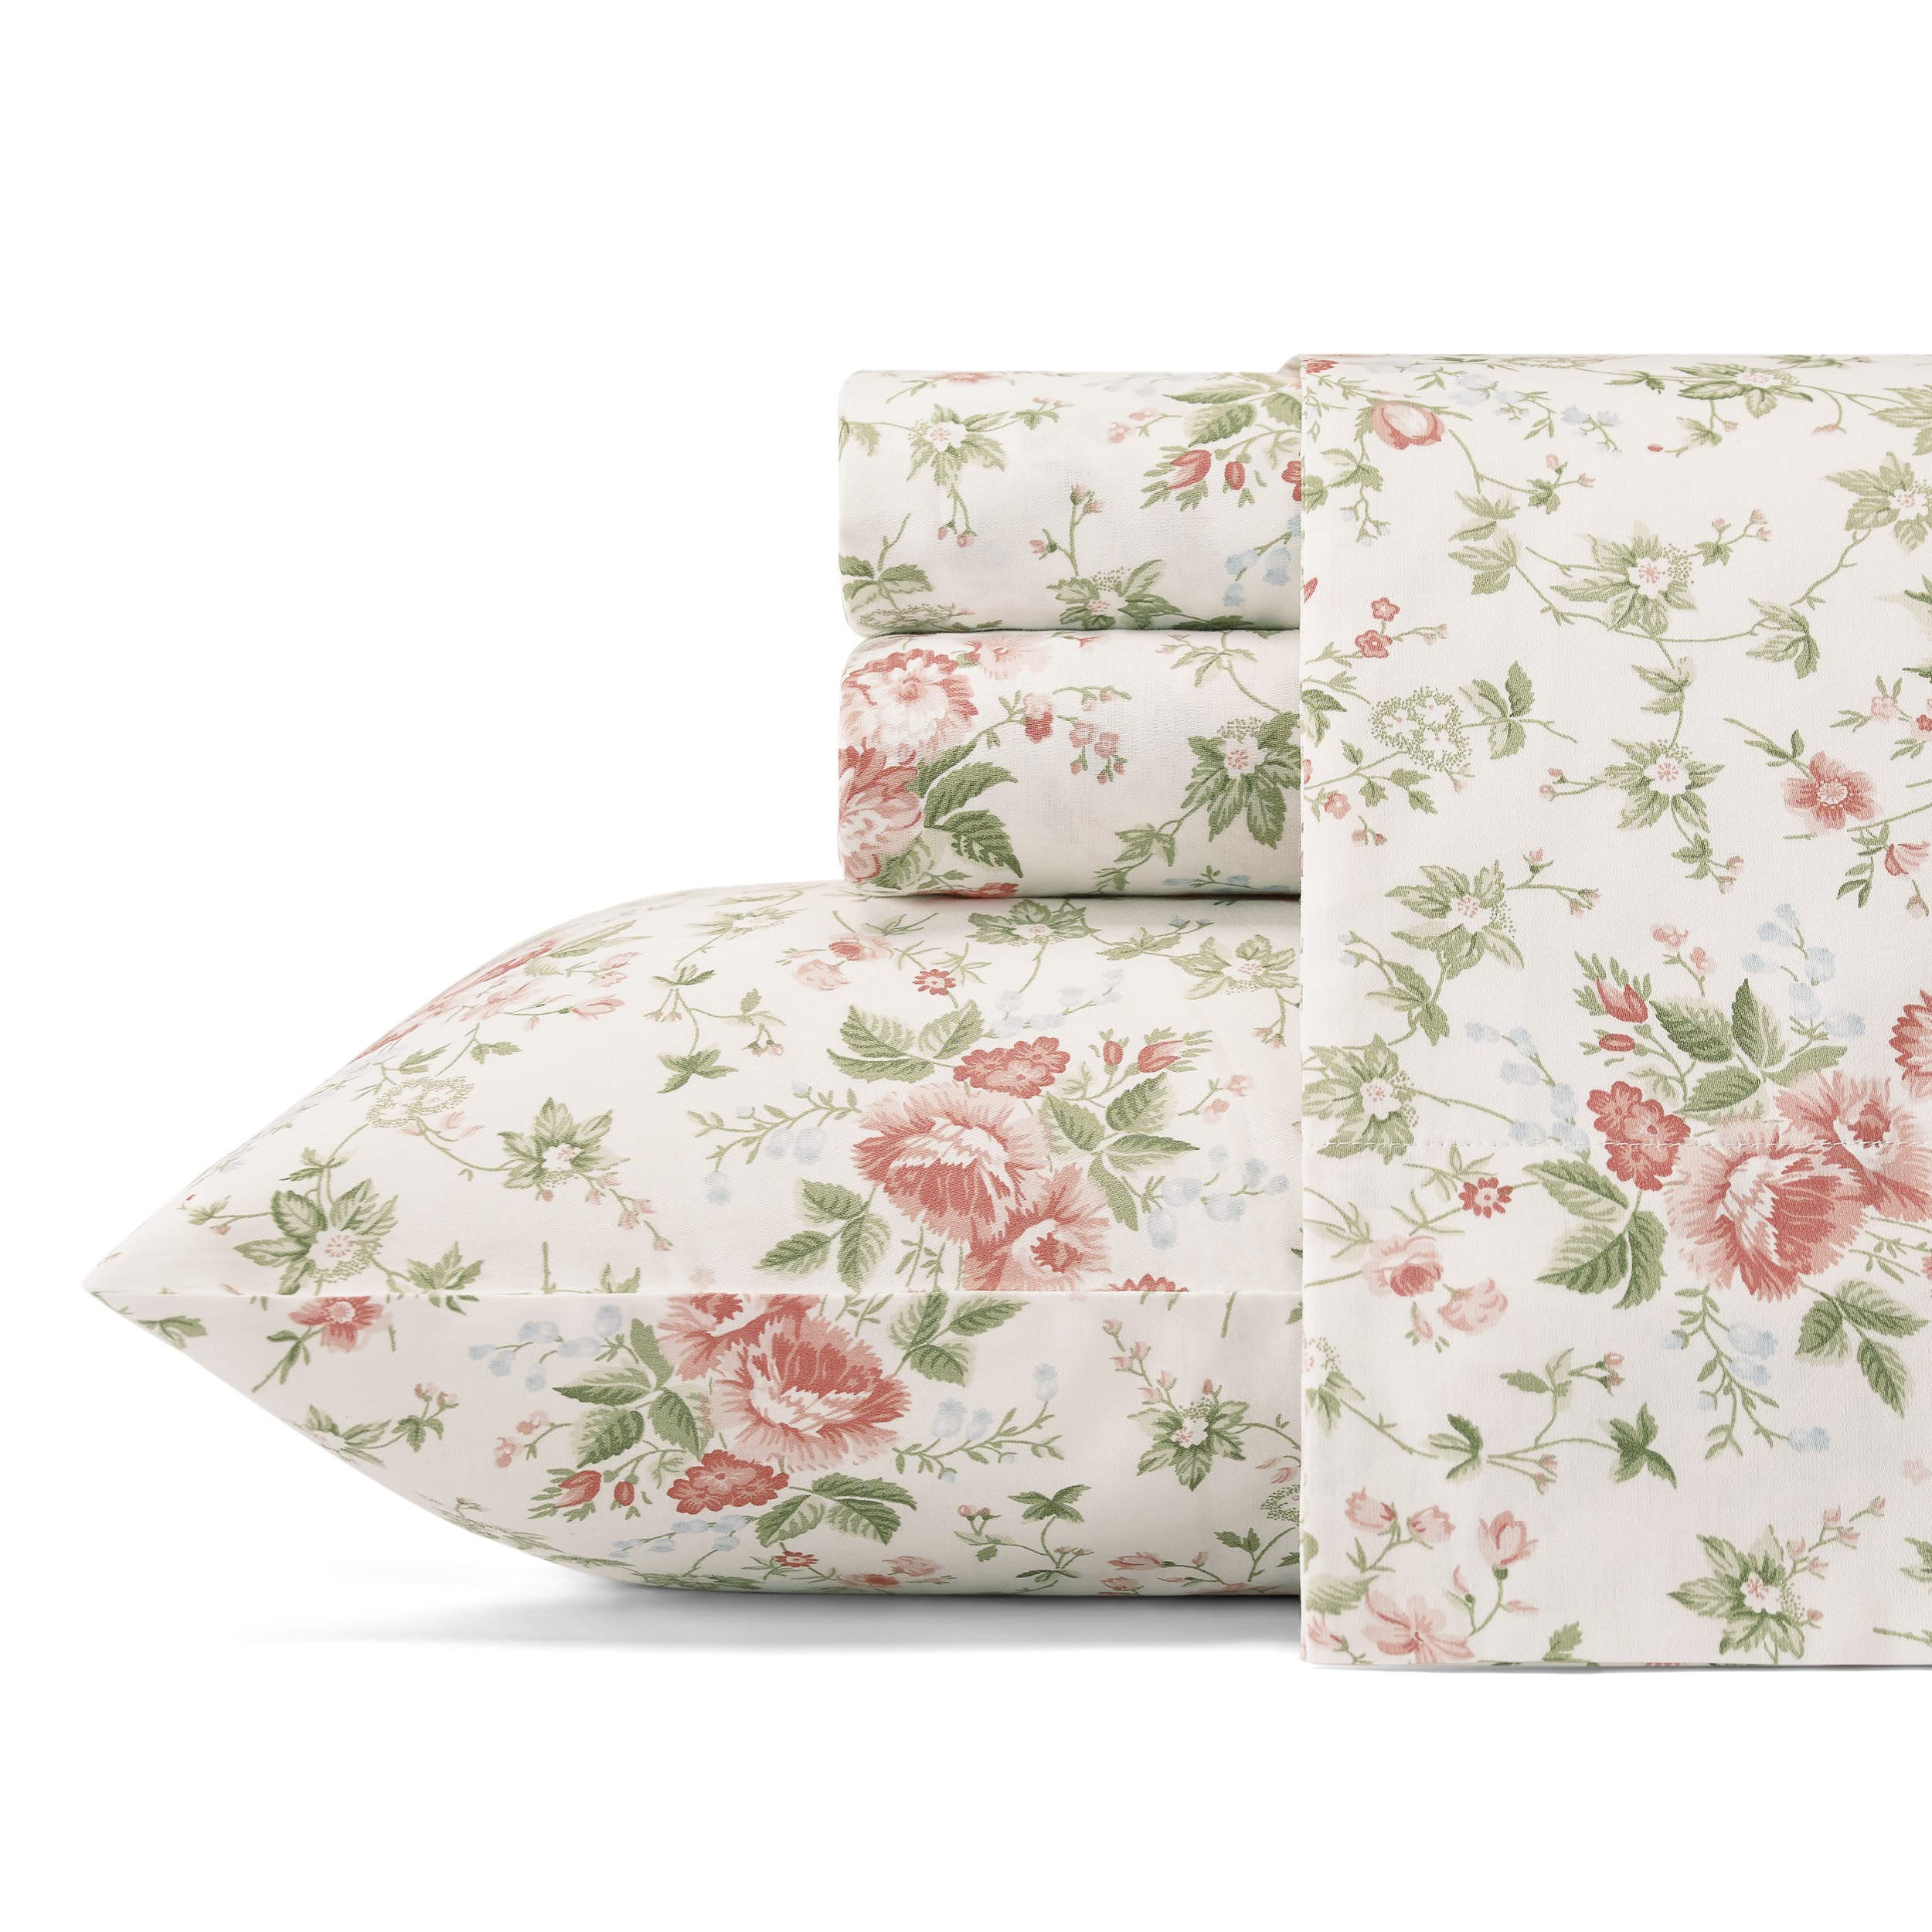 Book Cover Laura Ashley Home - King Sheets, Soft Sateen Cotton Bedding Set - 4 pieces, Sleek, Smooth, & Breathable Home Decor (Lilian Coral, King) Lilian Pink/Green/White King